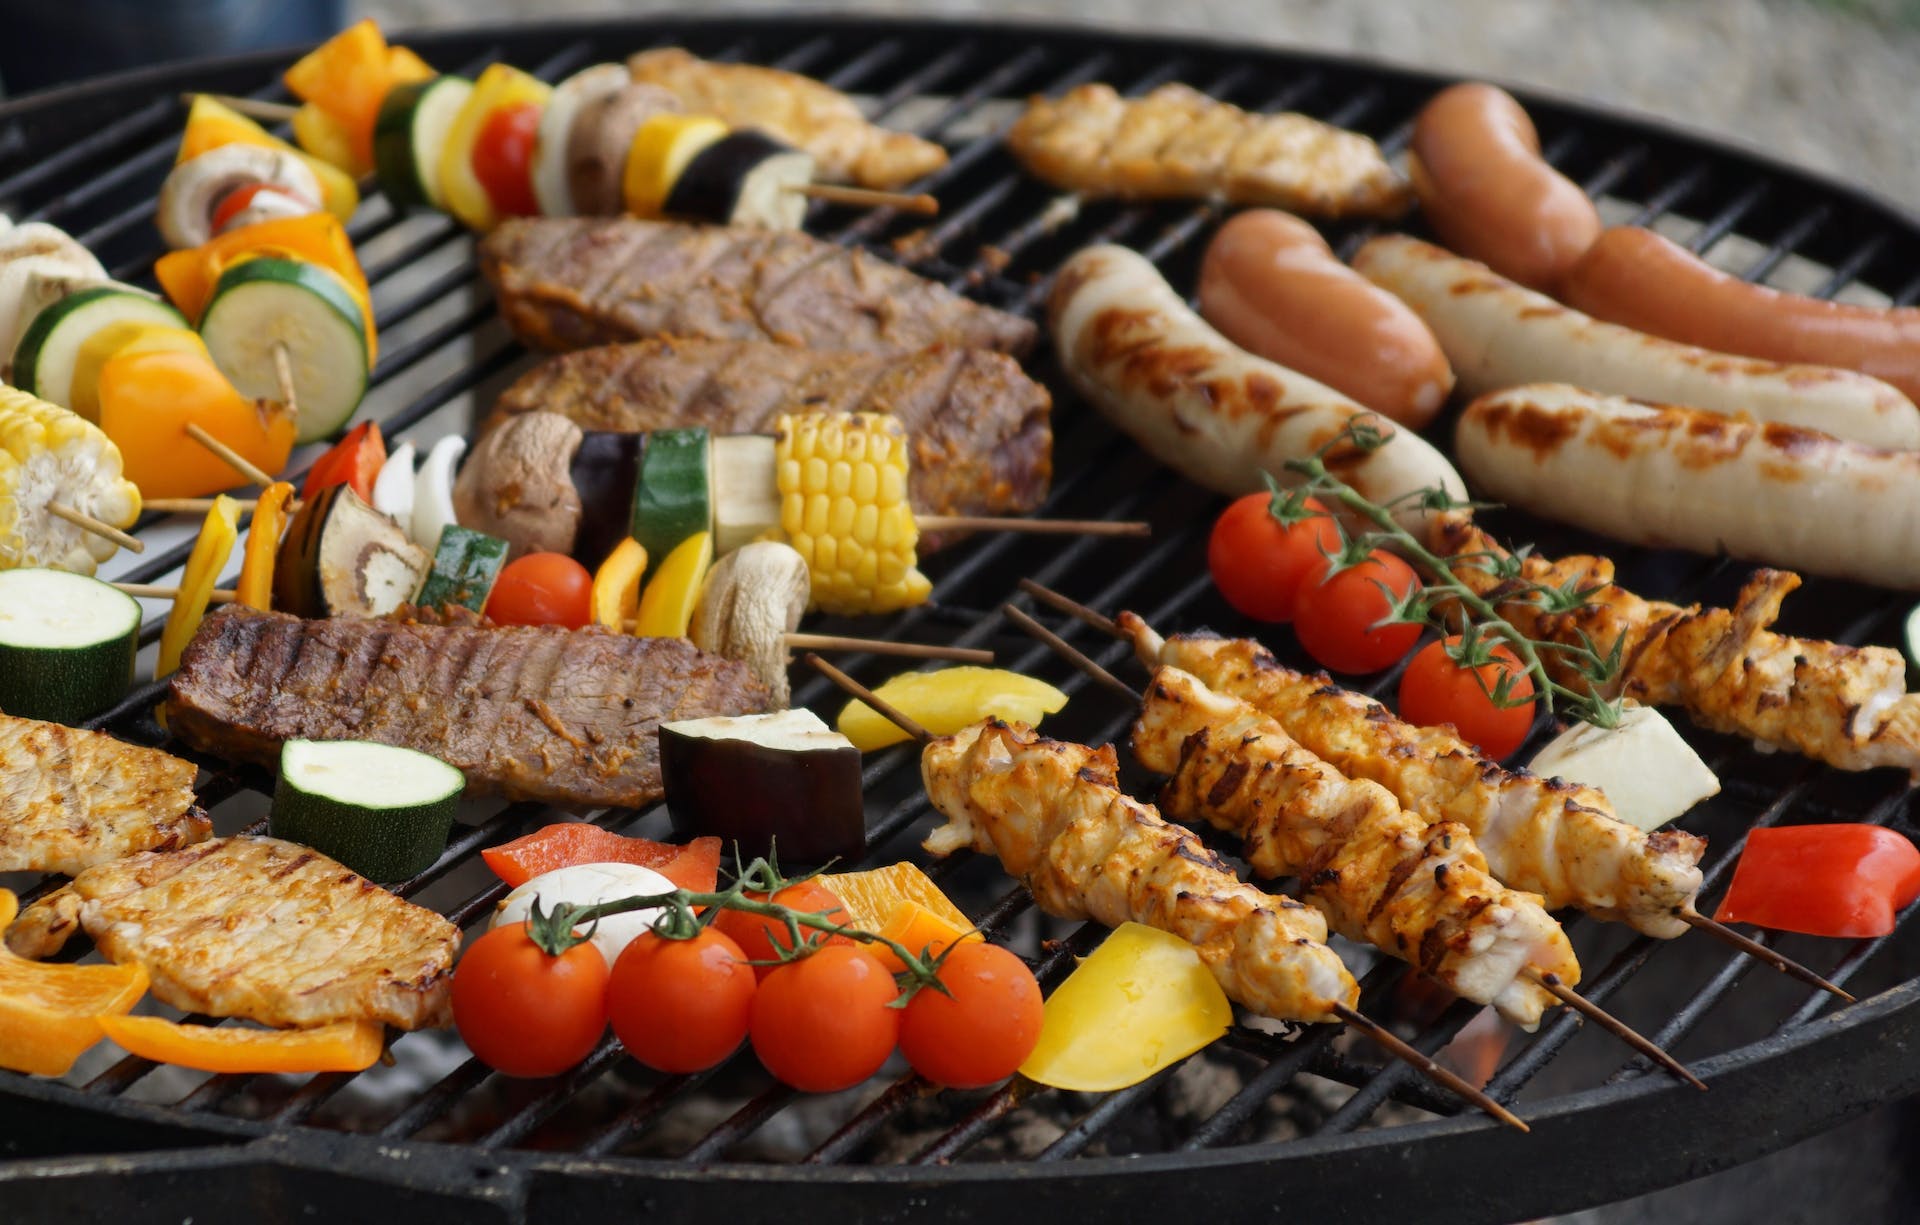 Food being cooked on a barbecue. | Source: Pexels